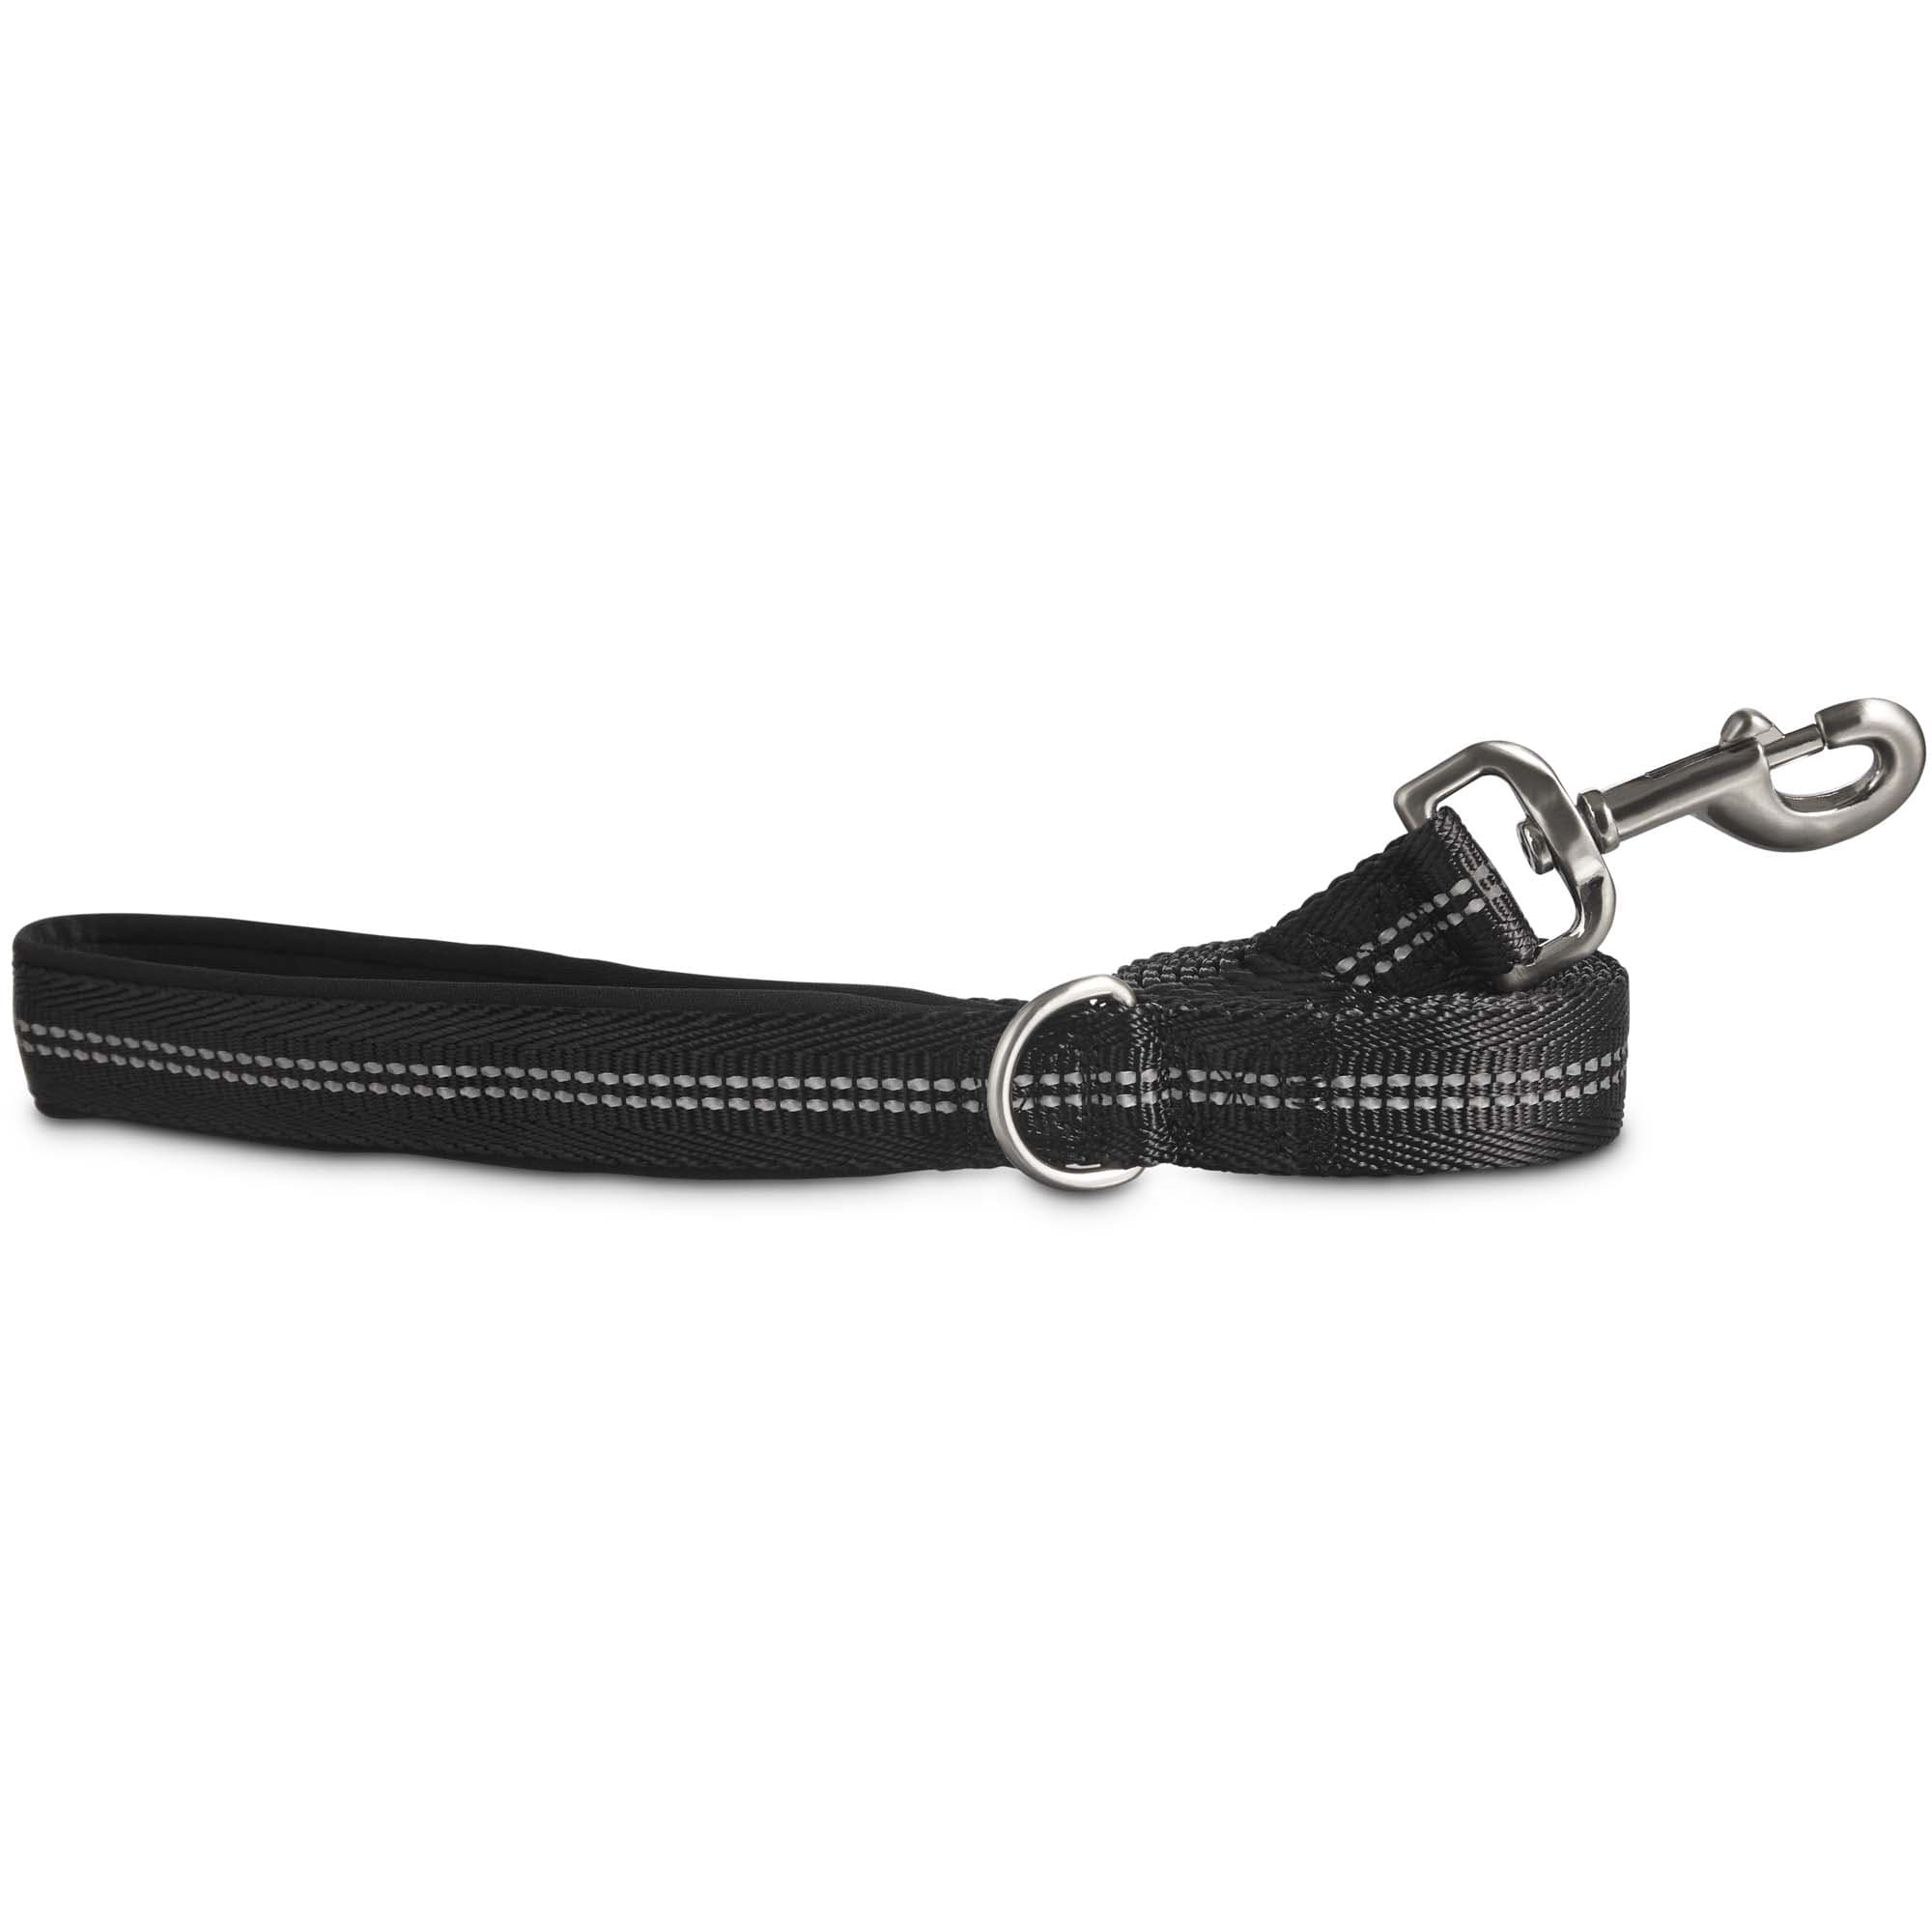 reflective leashes and collars